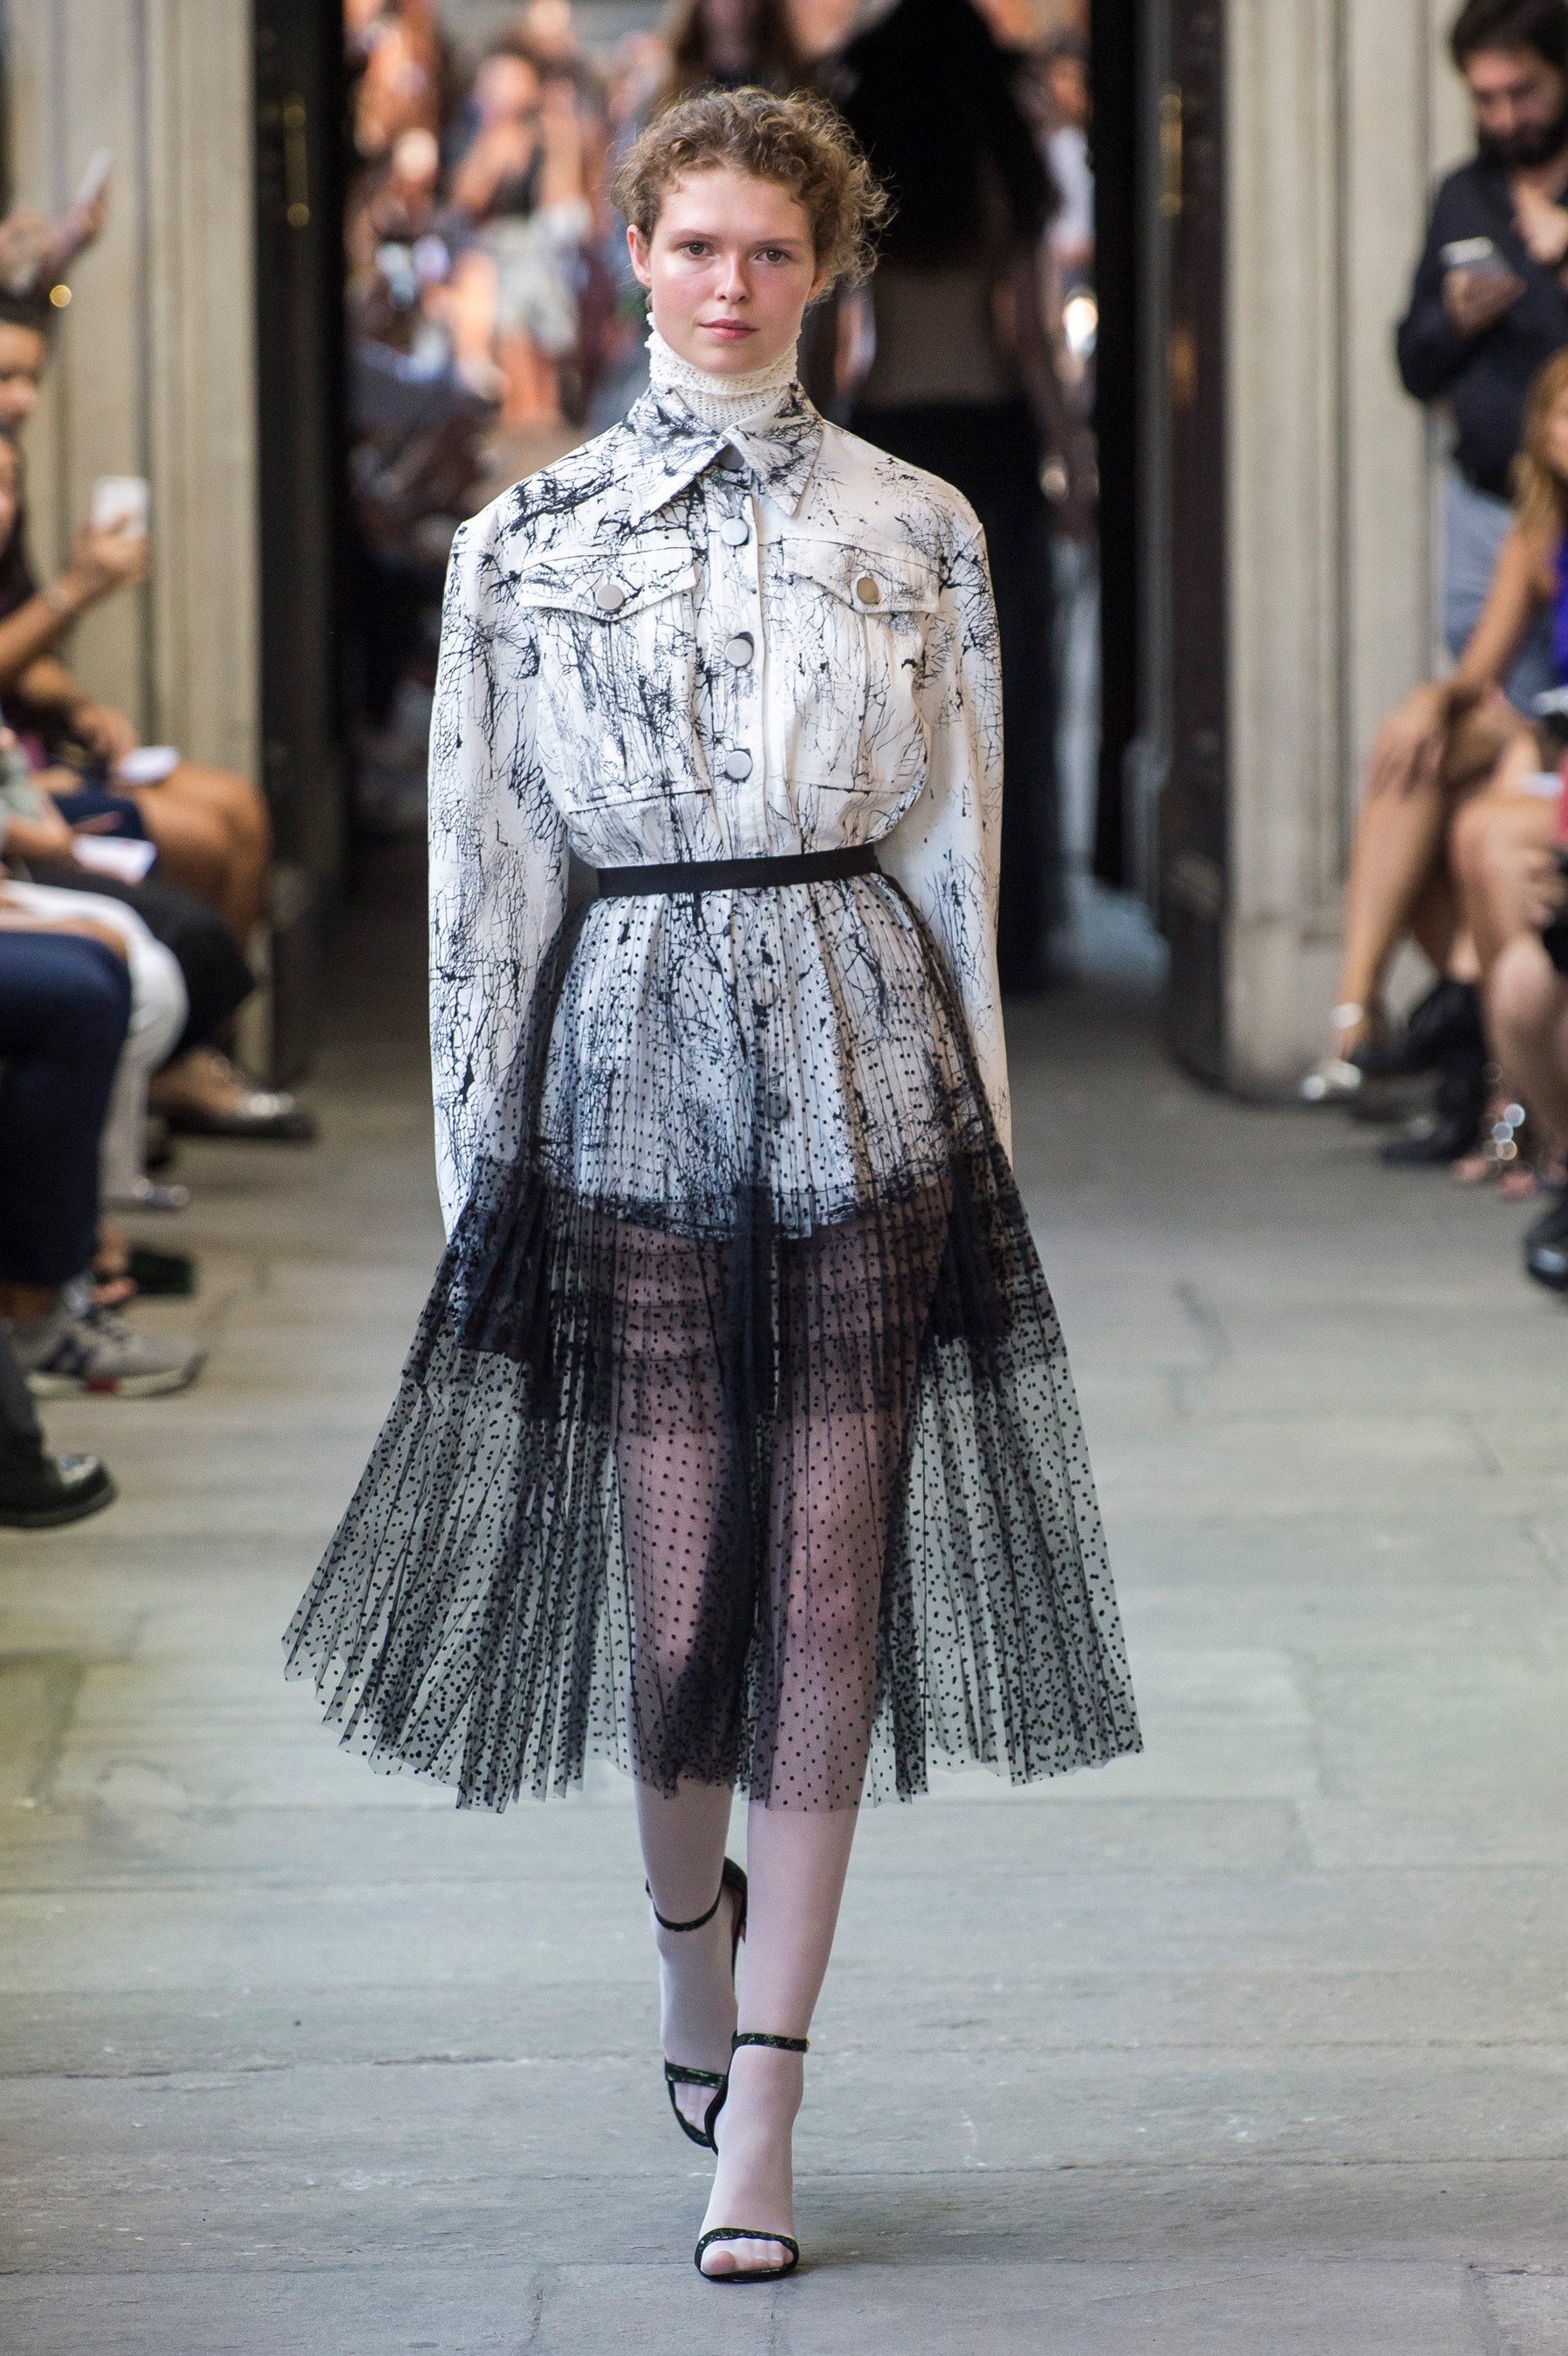 Top 10 Milan Spring 2019 Collections and Fashion Shows - The Impression